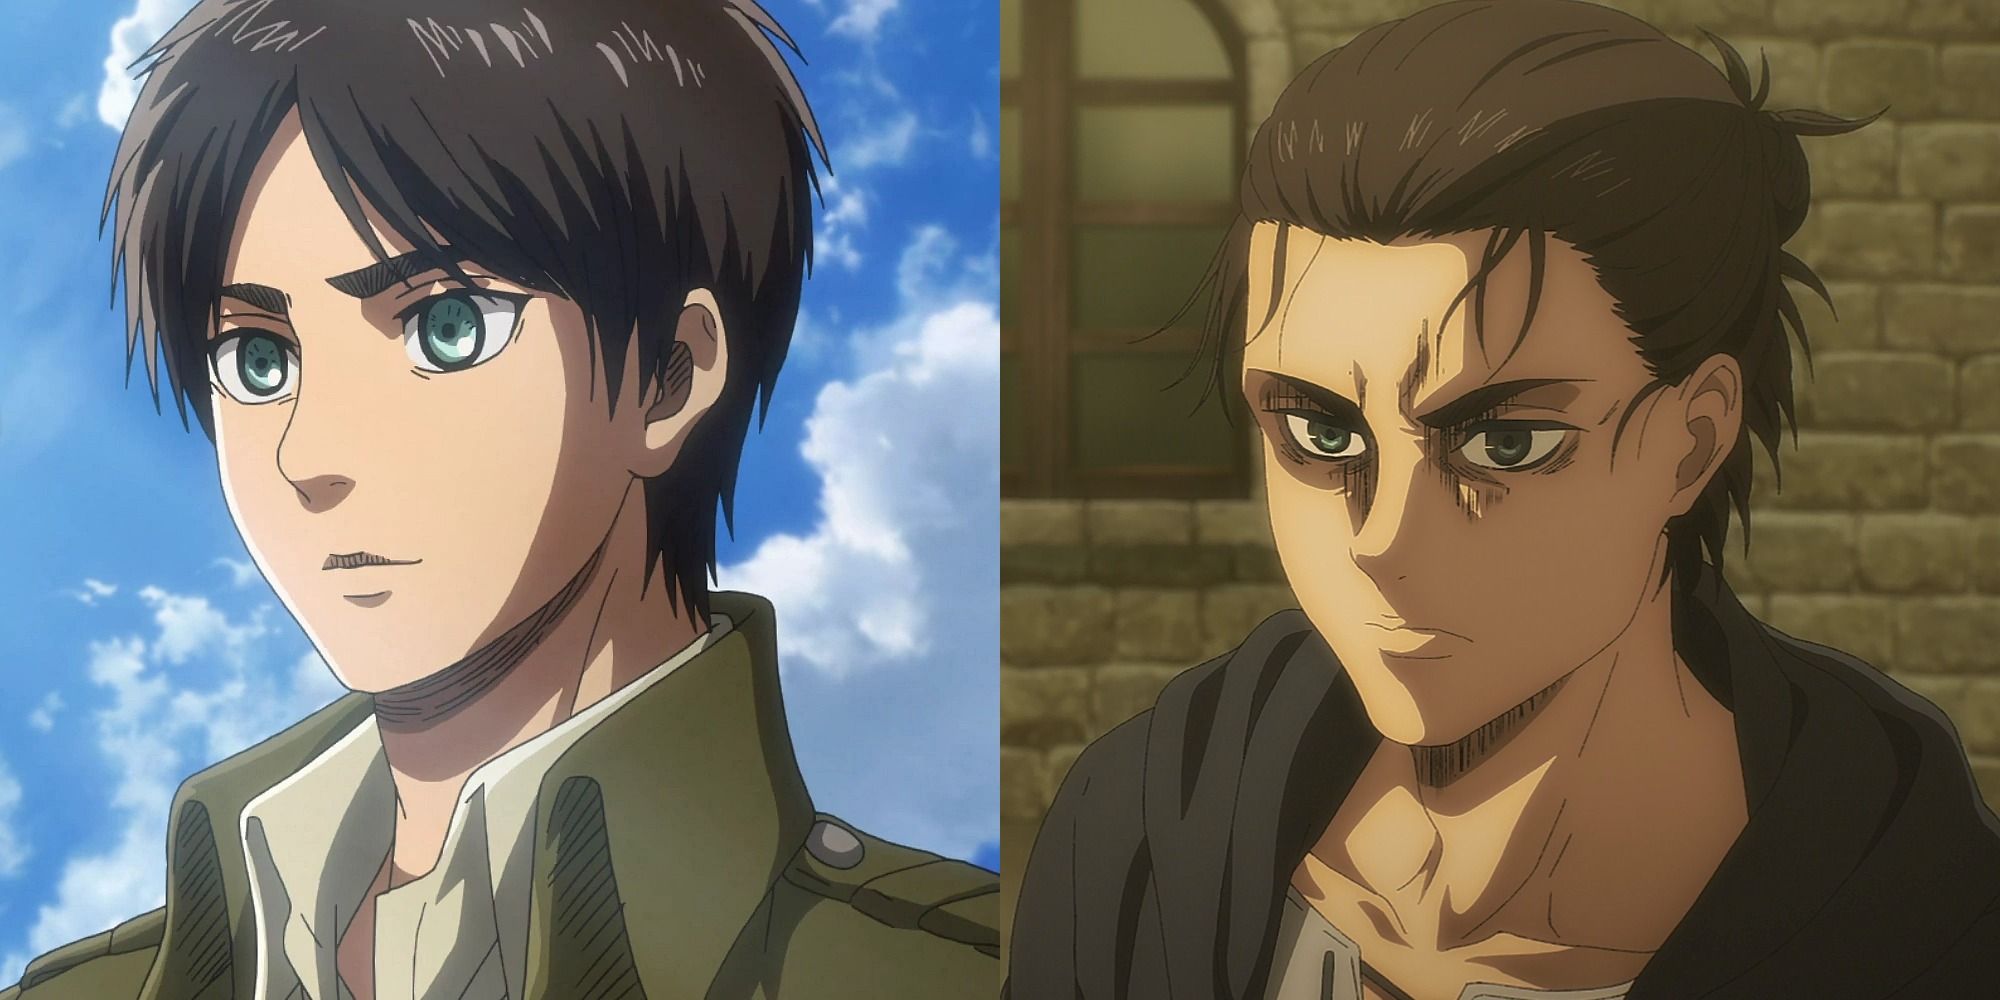 Side by side images of Yeager from Attack on Titan